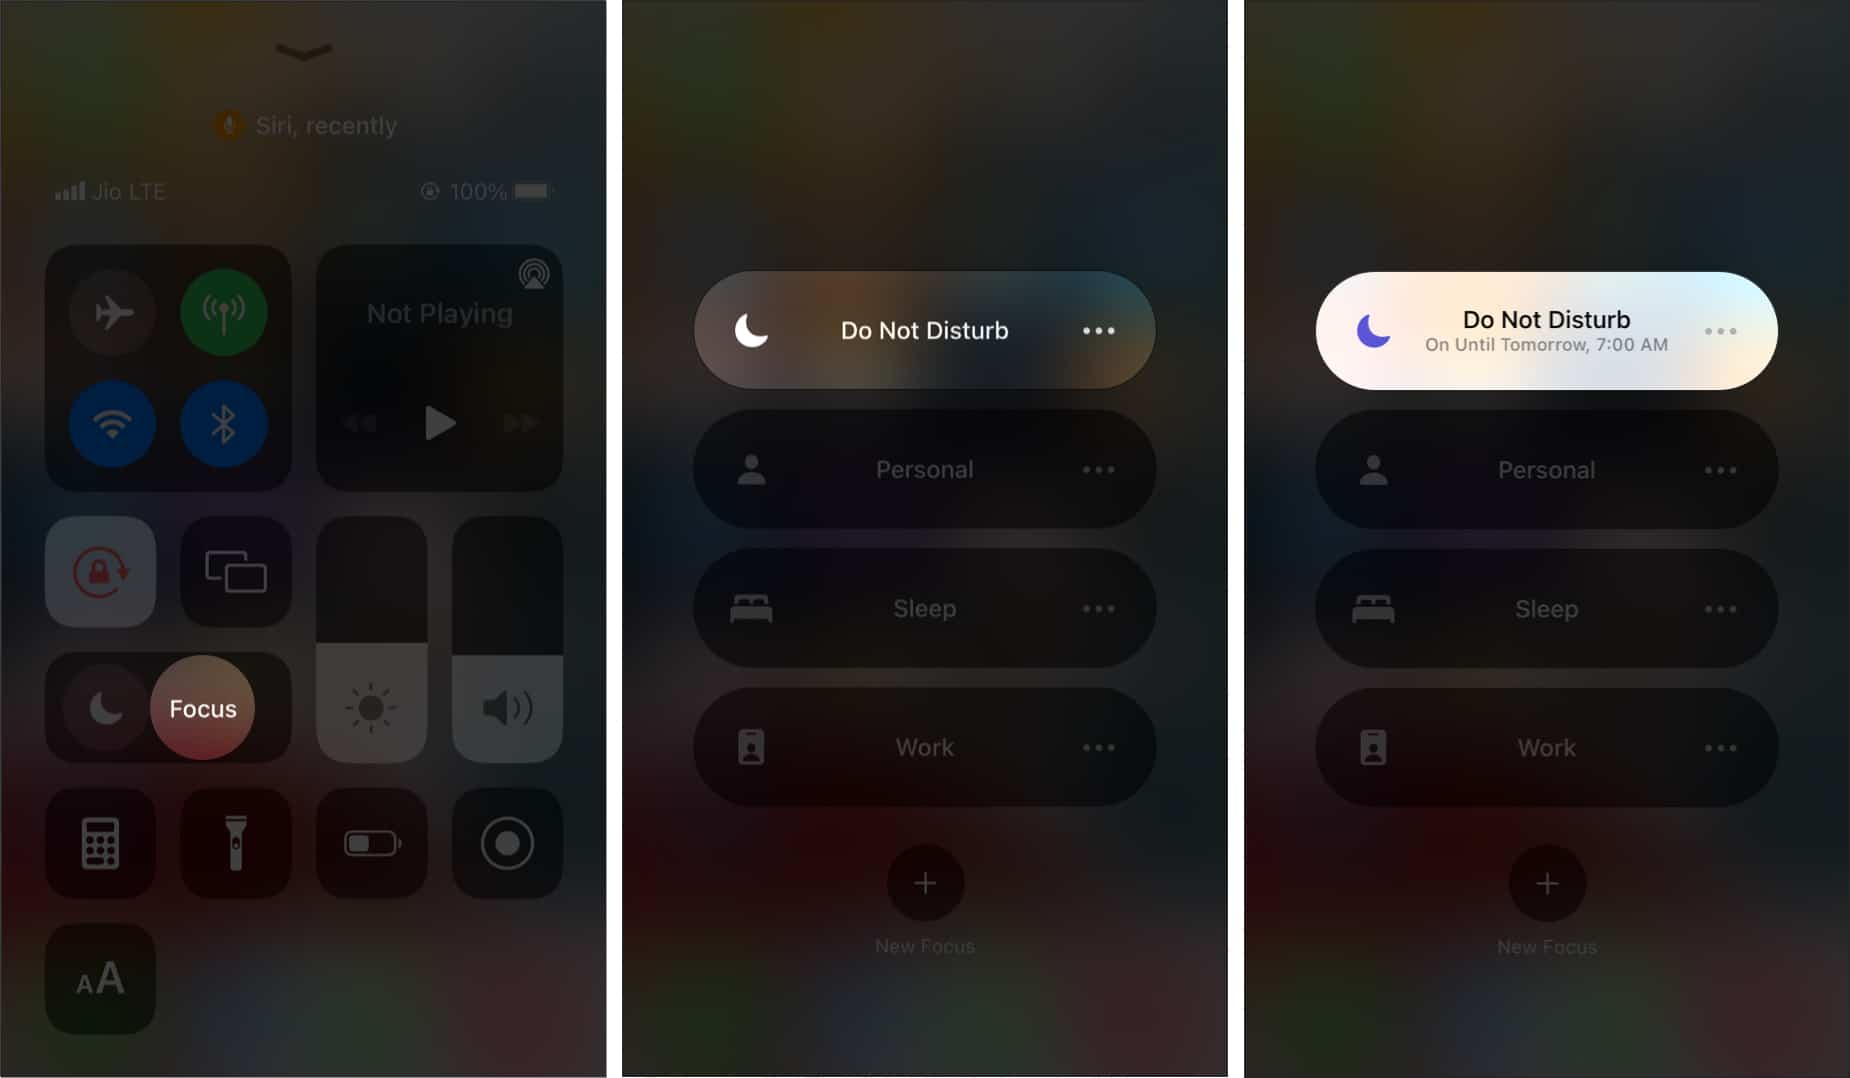 In iPhone Control Center tap Focus and Do Not Disturb to enable it